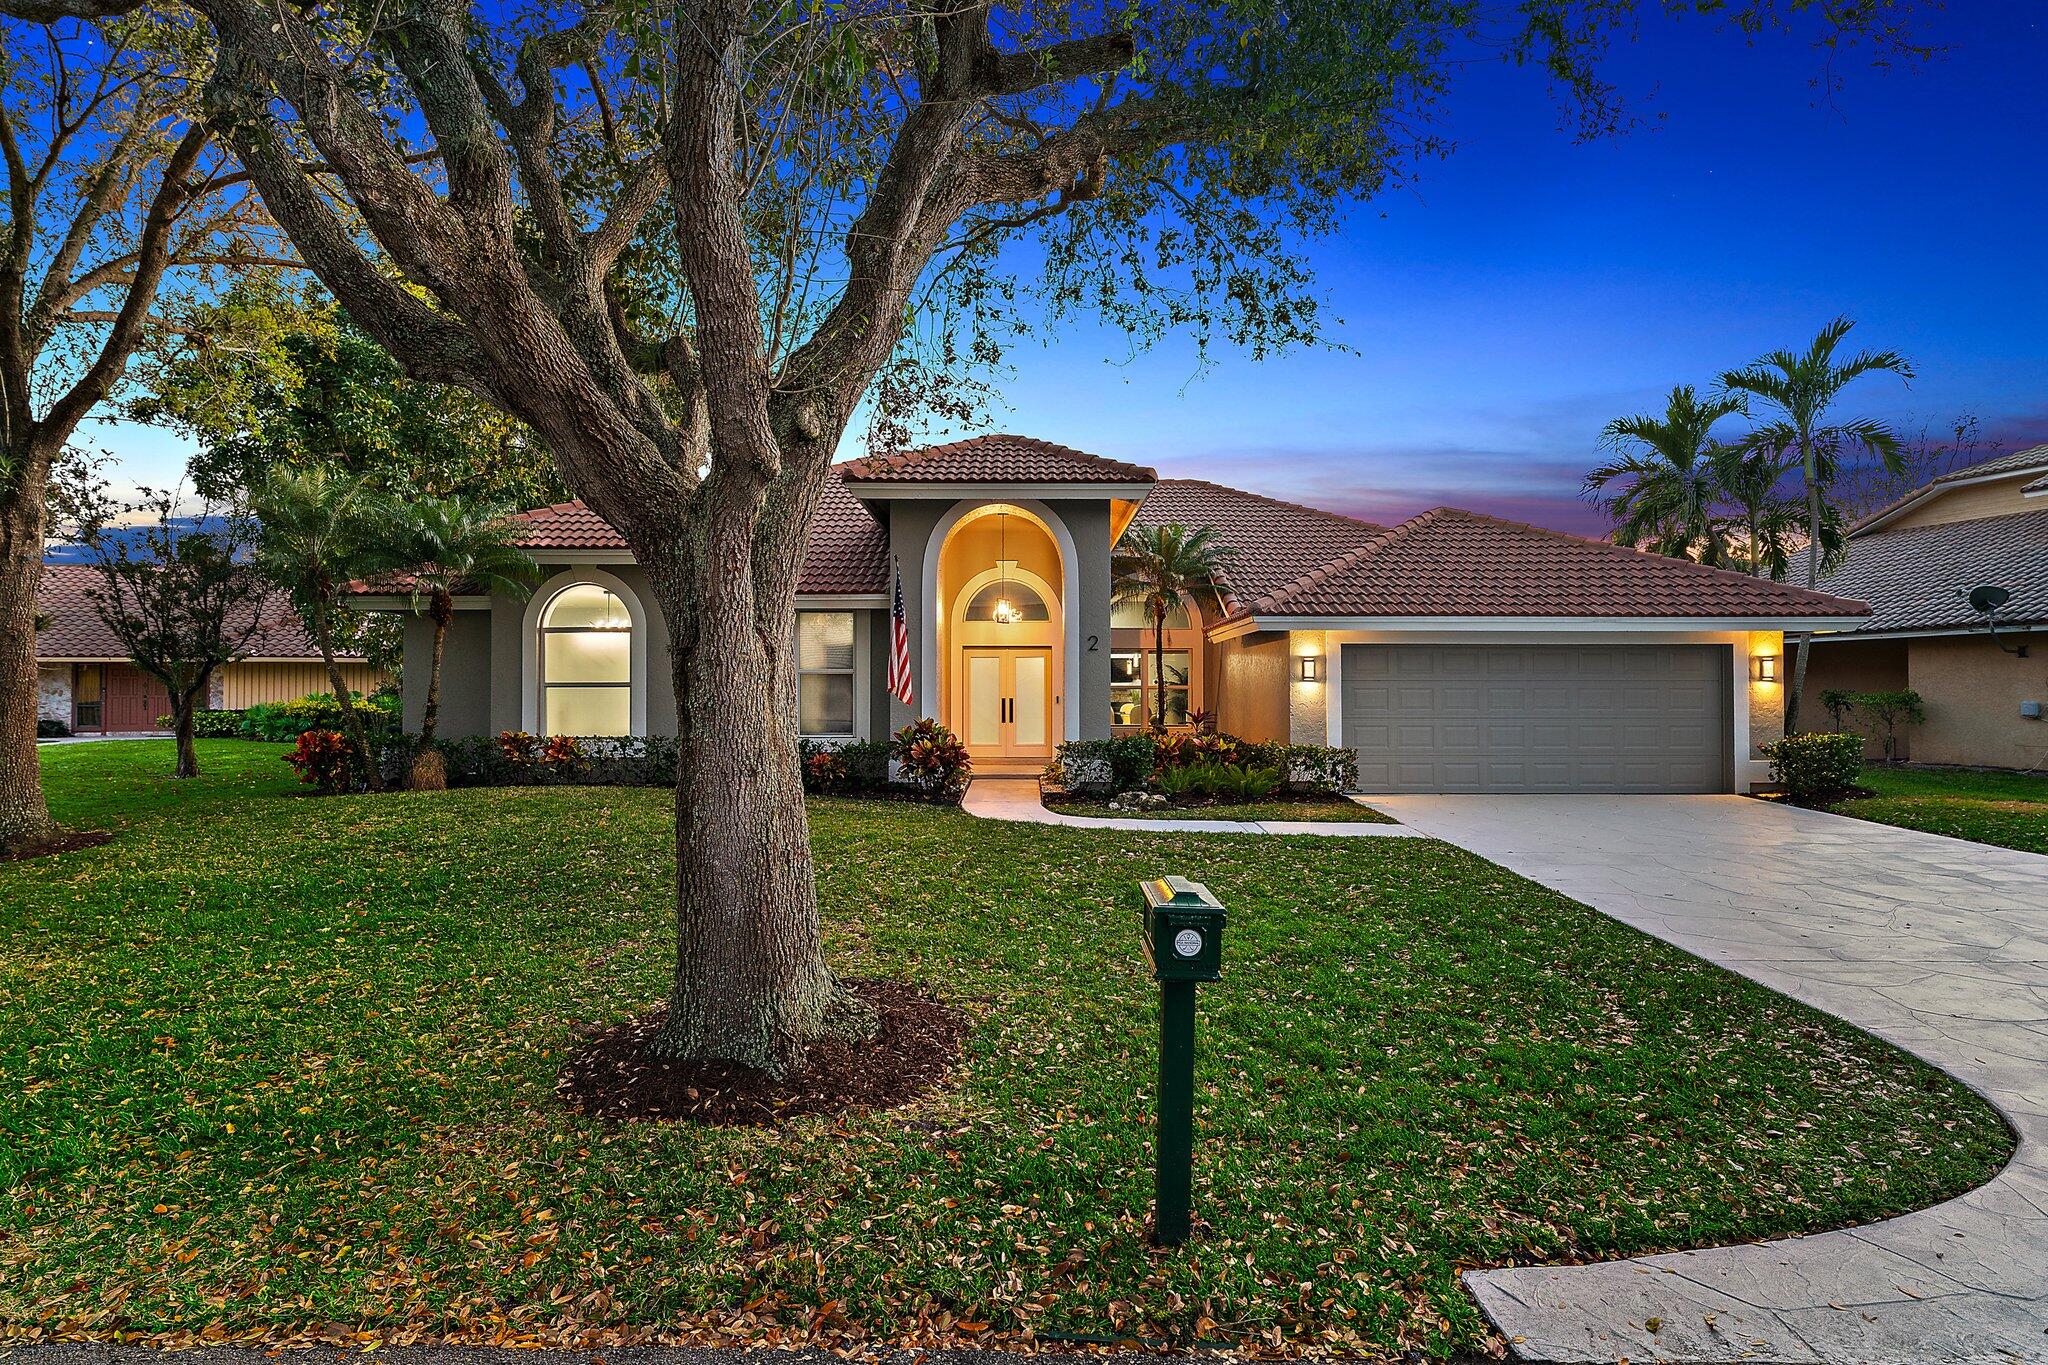 2 Old Fence Road, Palm Beach Gardens, Palm Beach County, Florida - 4 Bedrooms  
2.5 Bathrooms - 